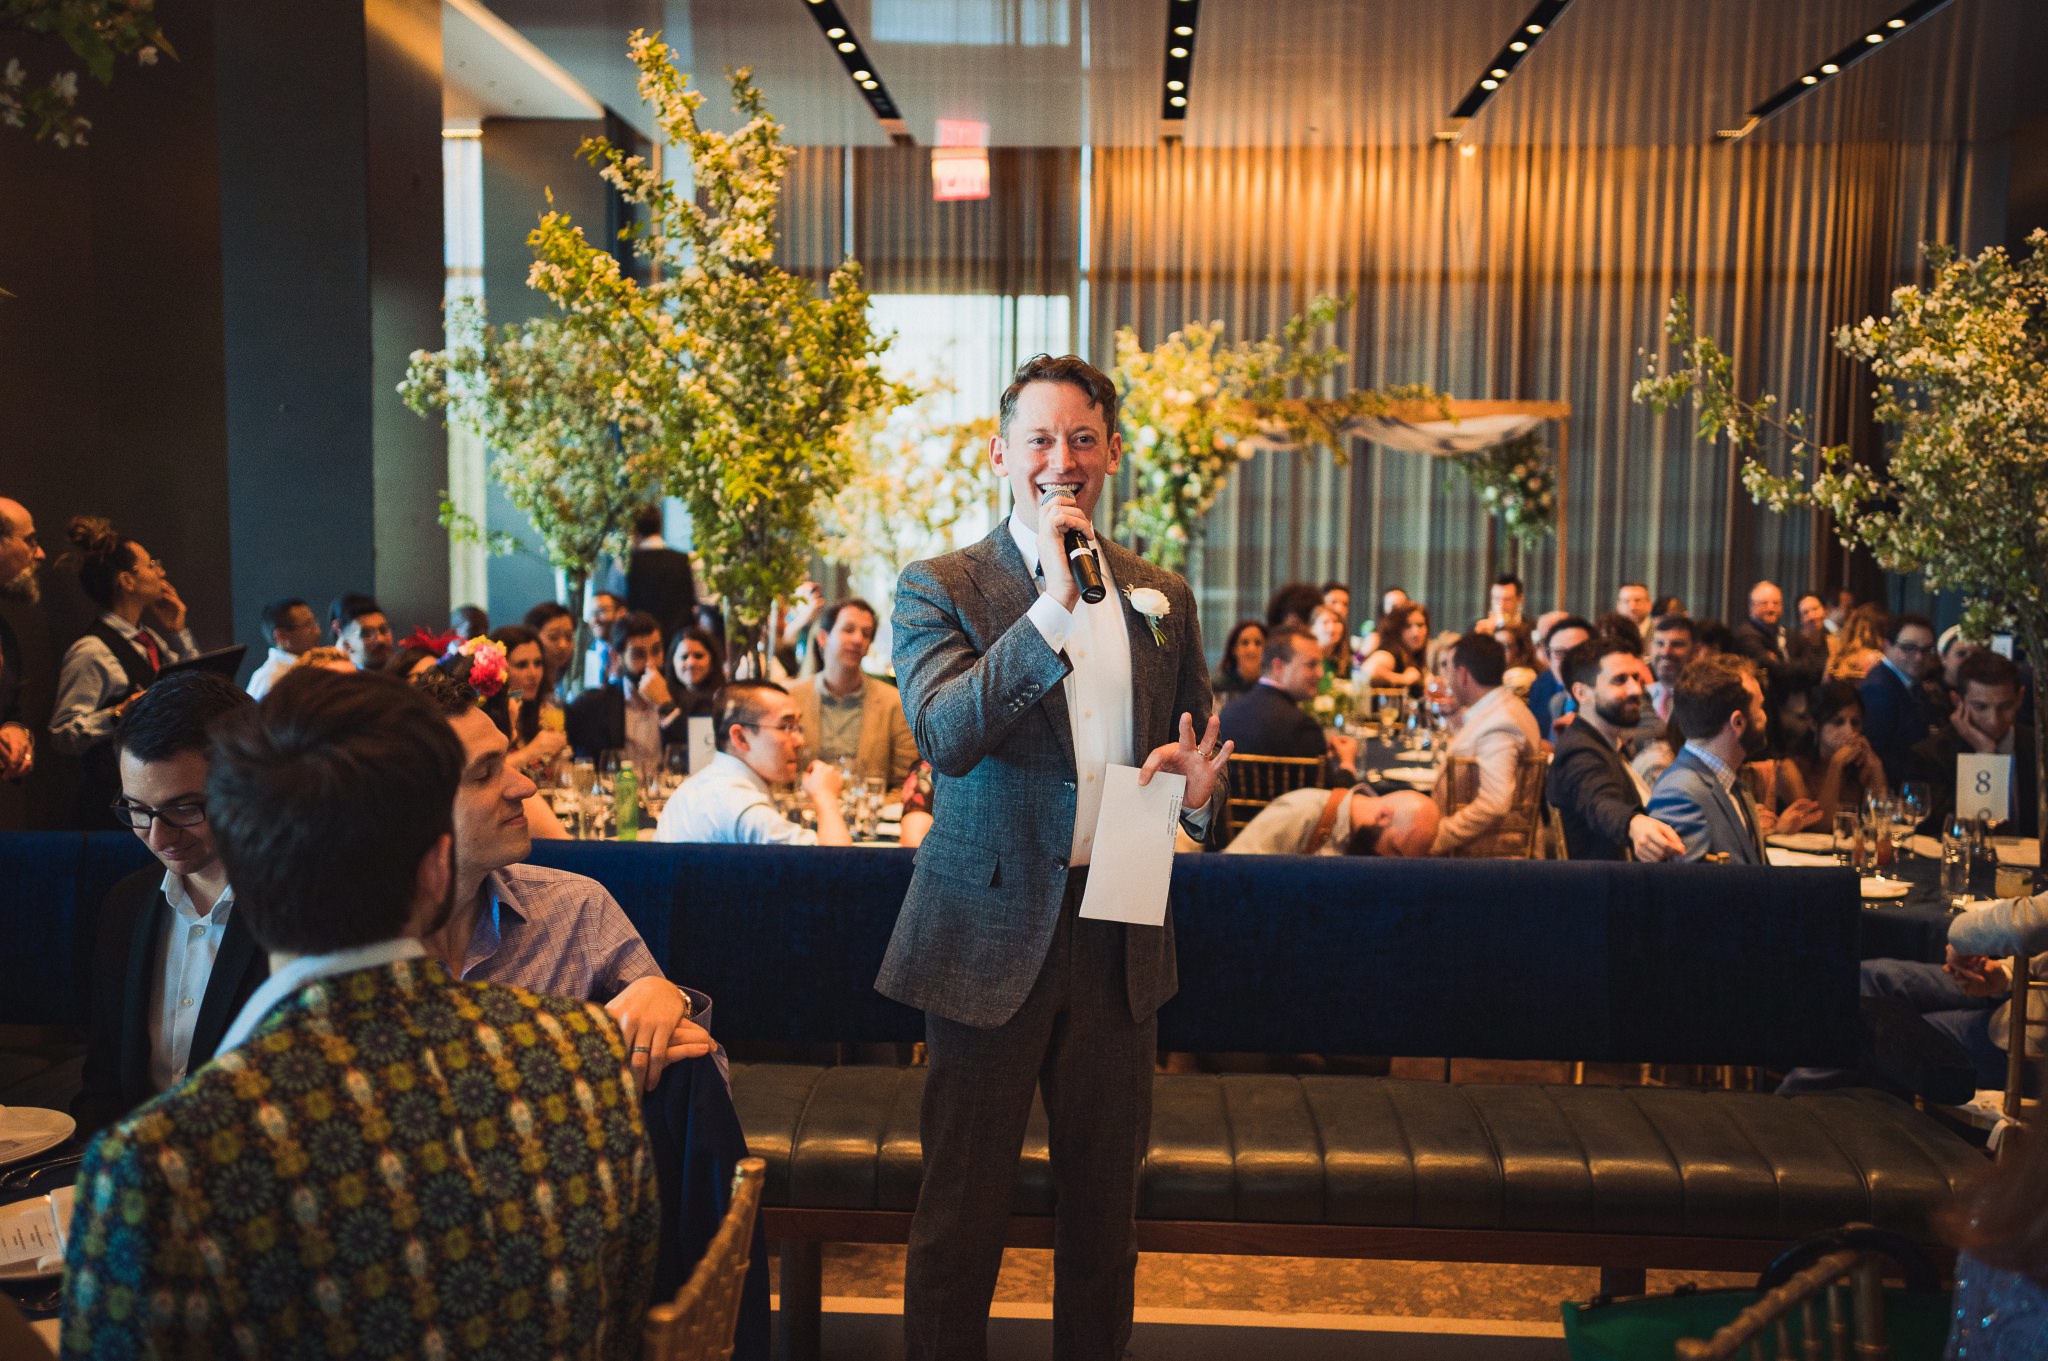  Scenes from Brian and Scotts brunch reception after their wedding ceremony at Riverpark NYC.  